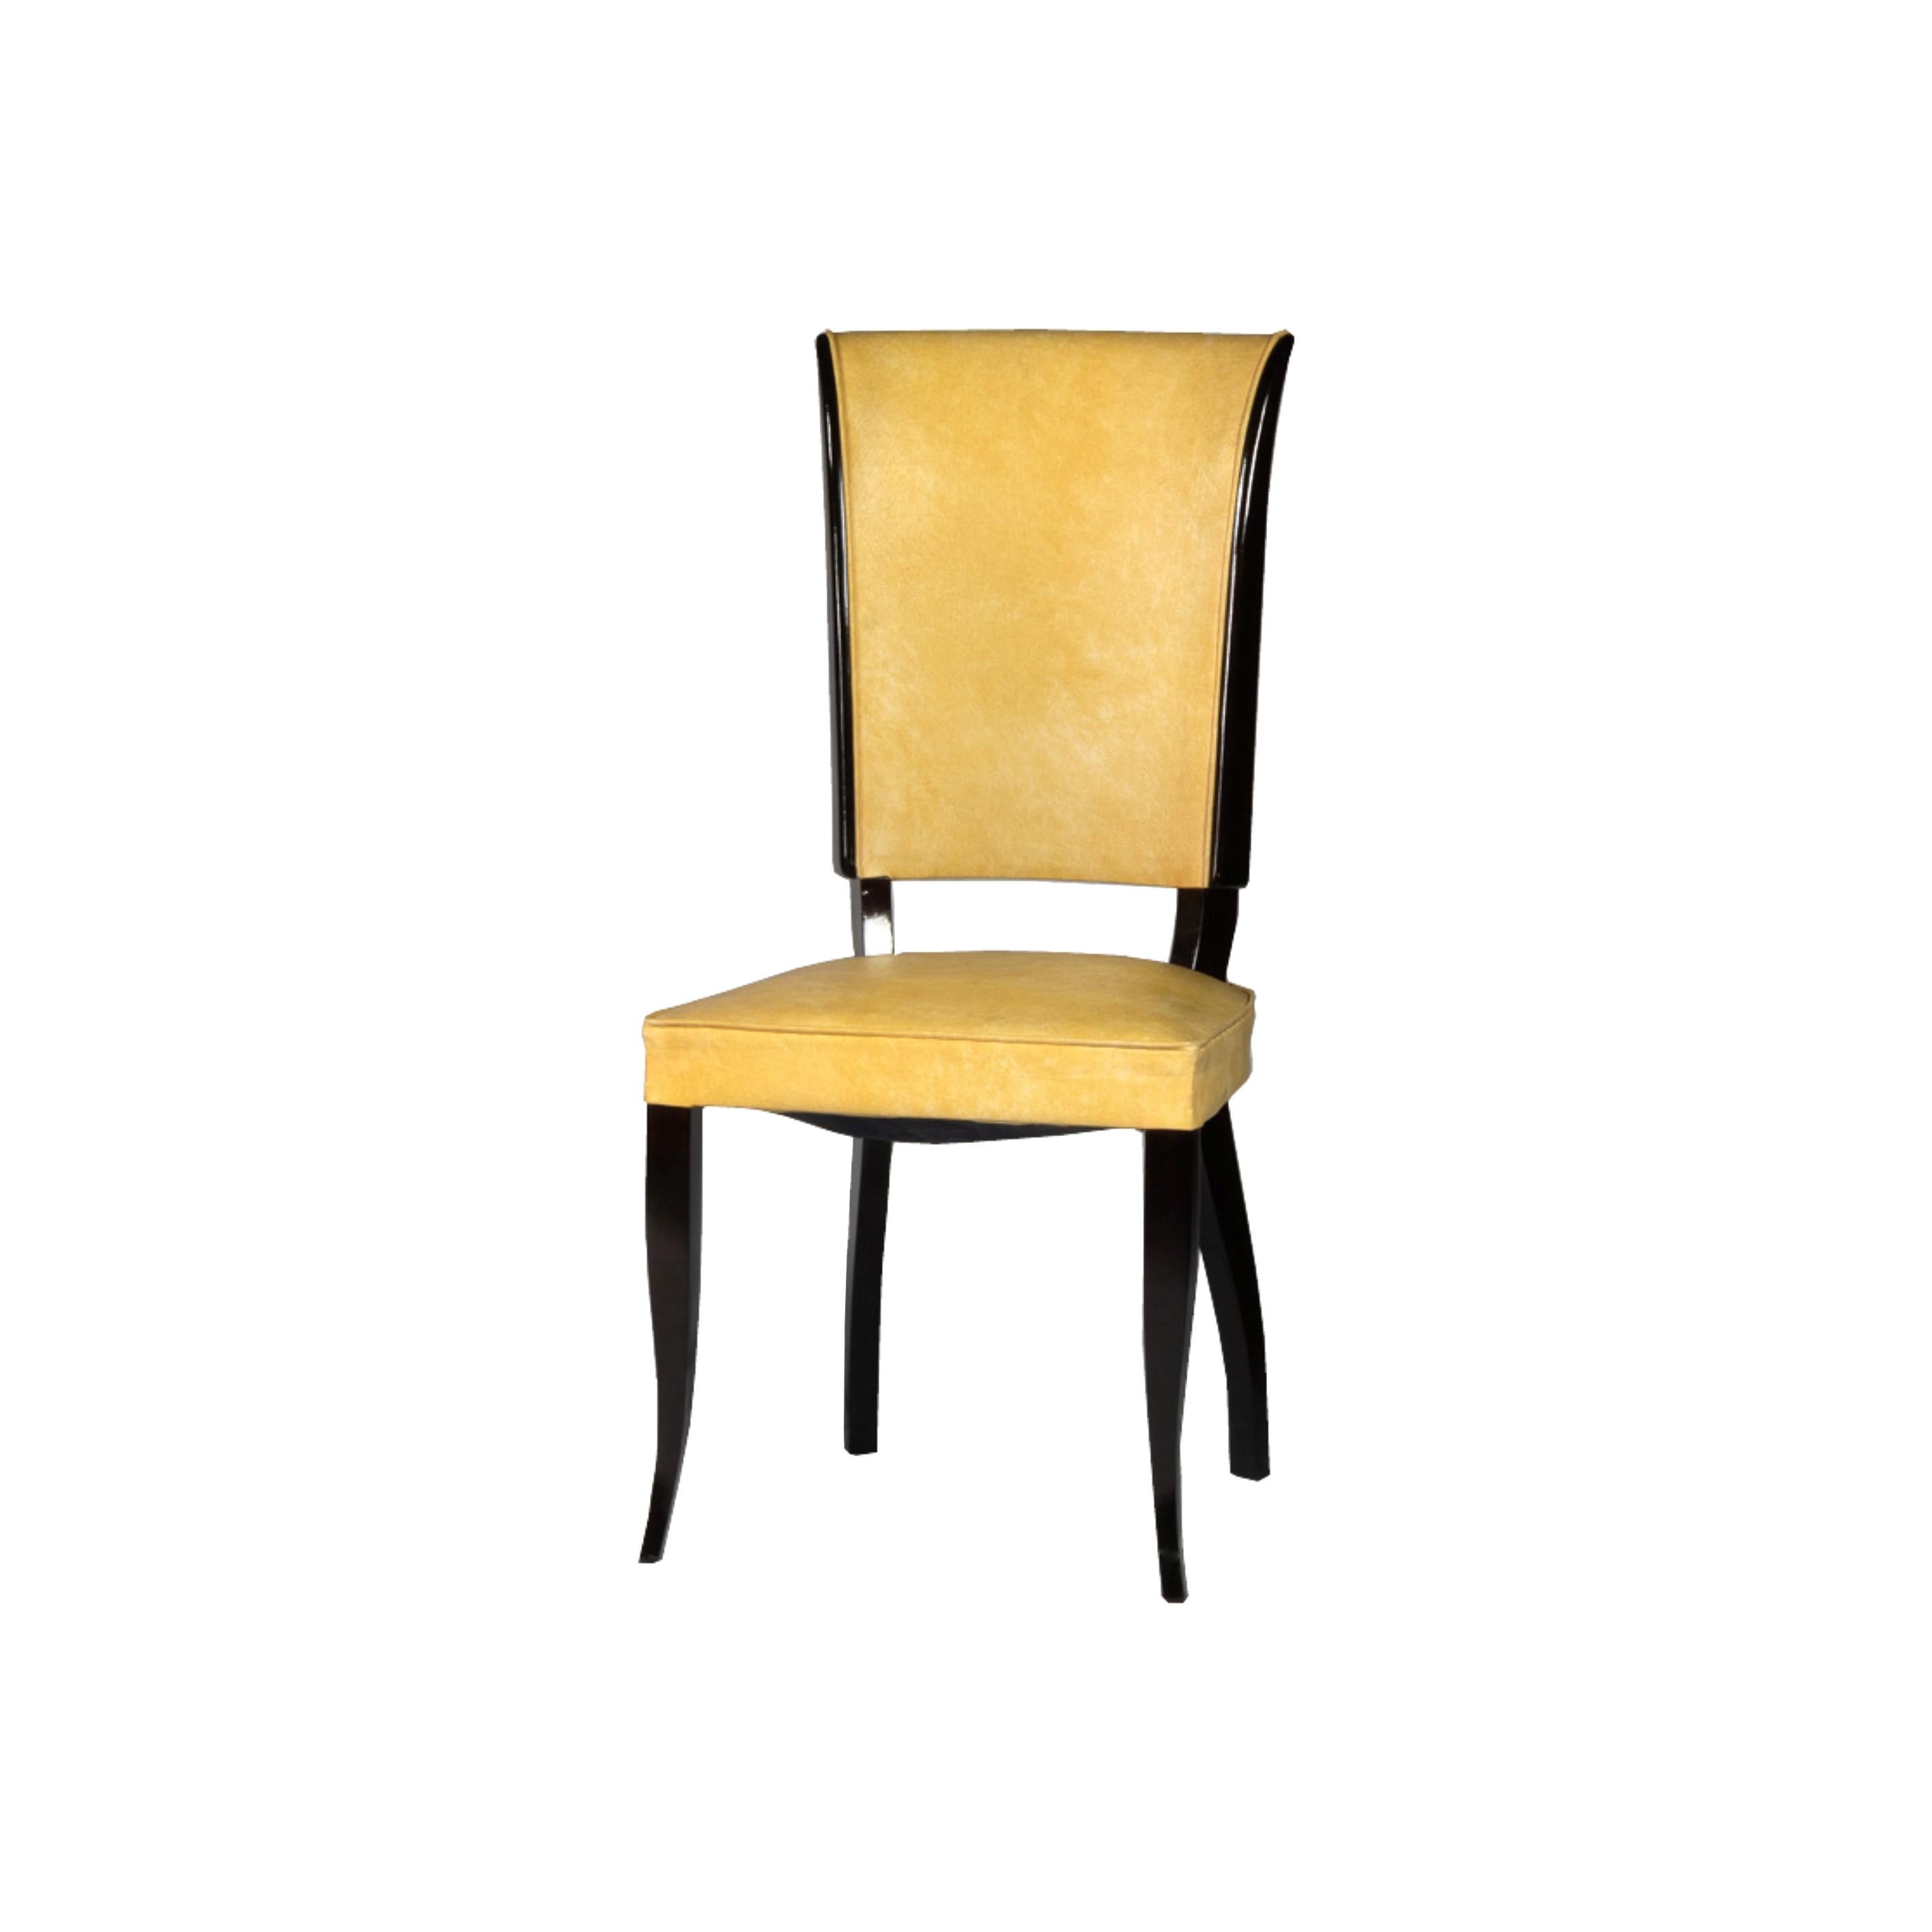 A very elegant set of six dining chairs finished with a lacquered doucine base polish and elegant yellow vinyl. 
Chairs in good condition, reviewed recently by a carpenter.
An exemplar set of Art Deco style for the perfect and timeless decor.

